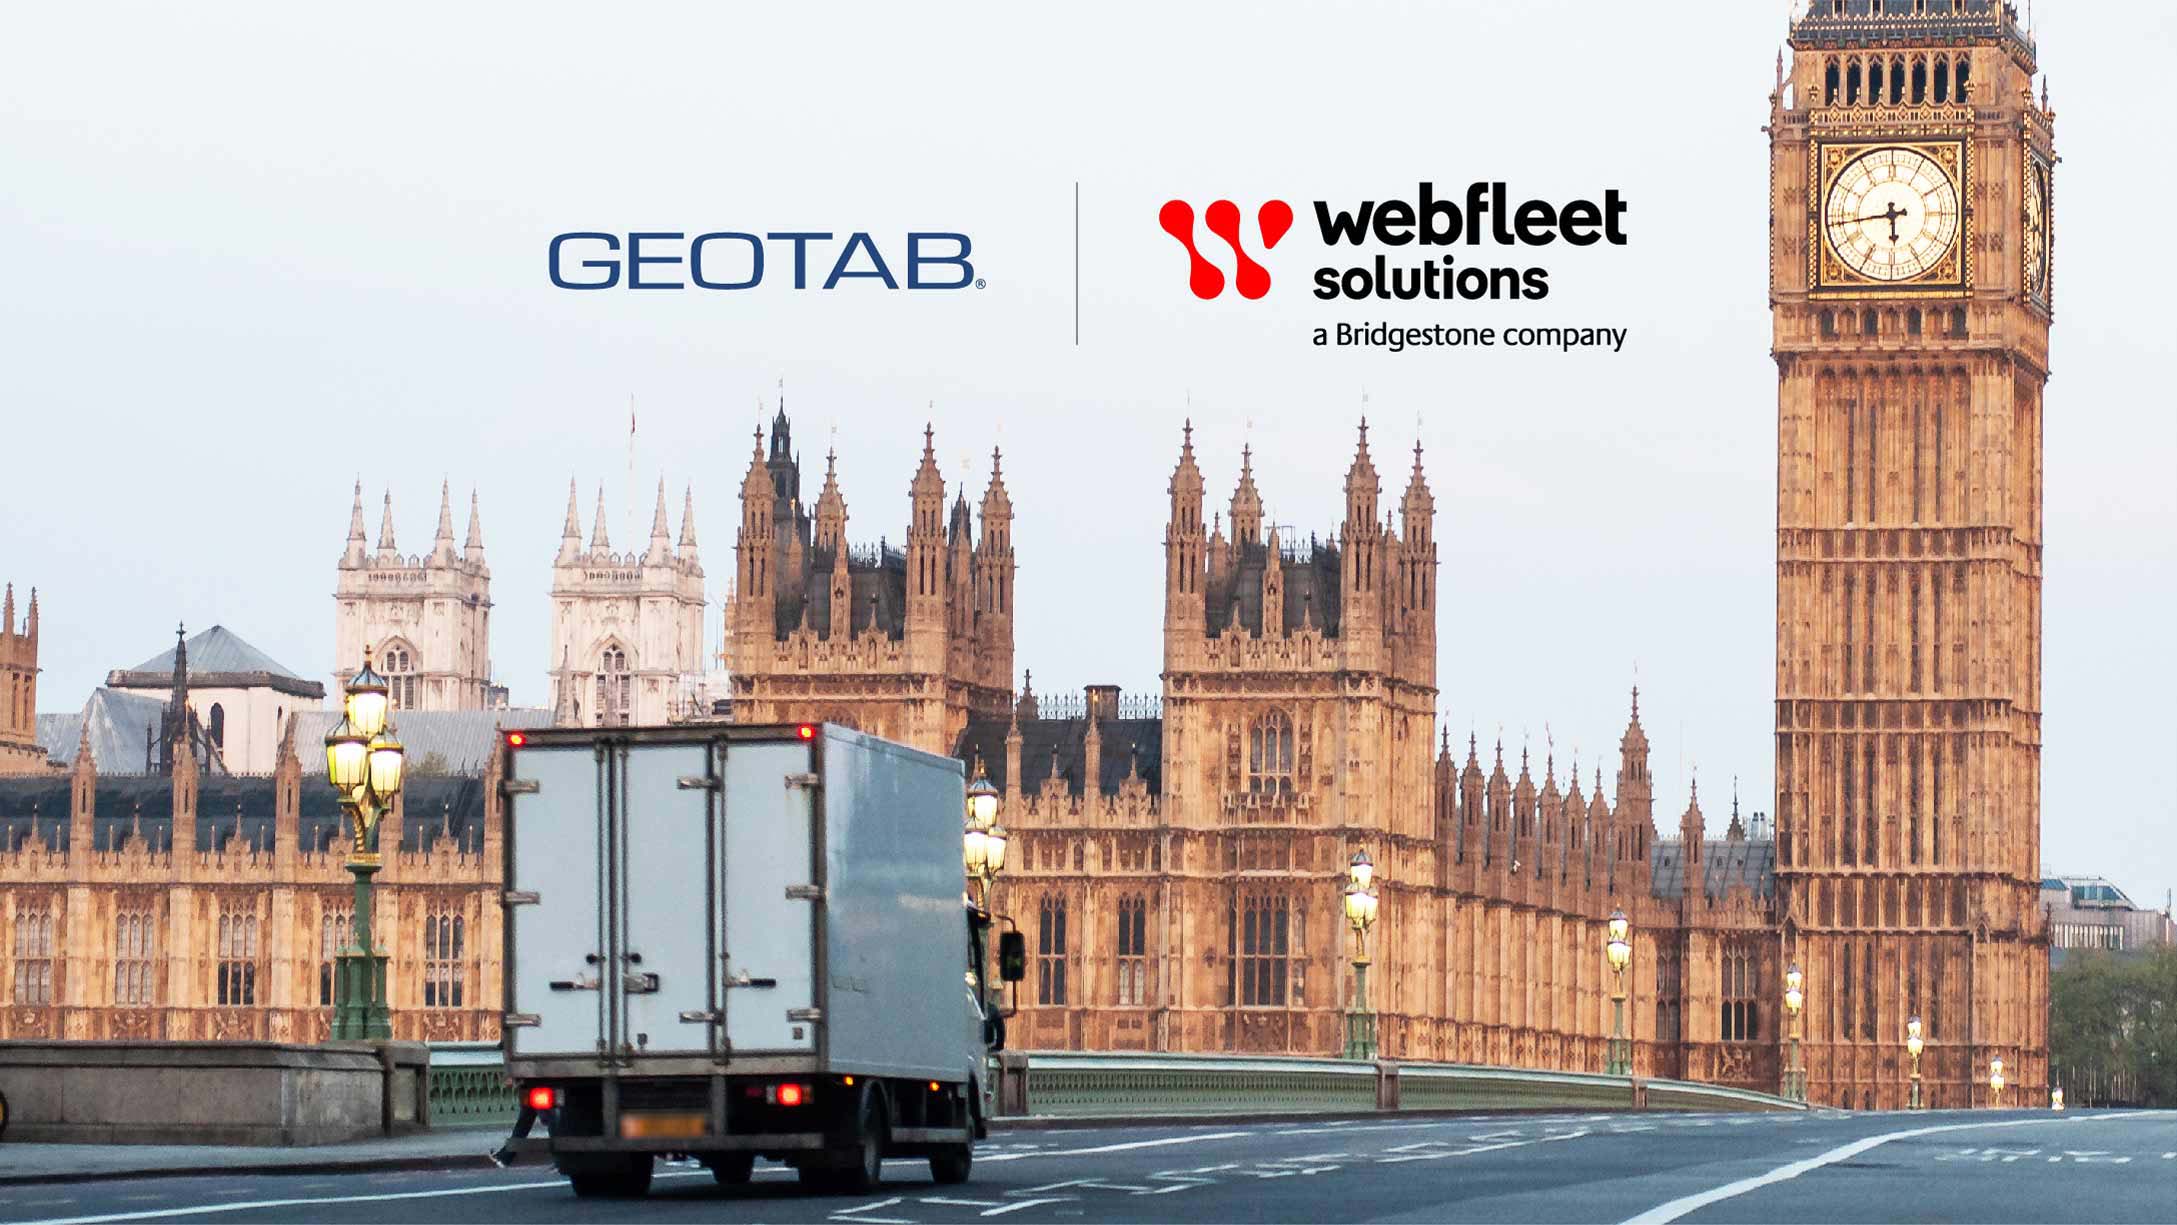 Transport truck driving in front of tall buildings in London, U.K. with Geotab and Webfleet Solutions logo in background